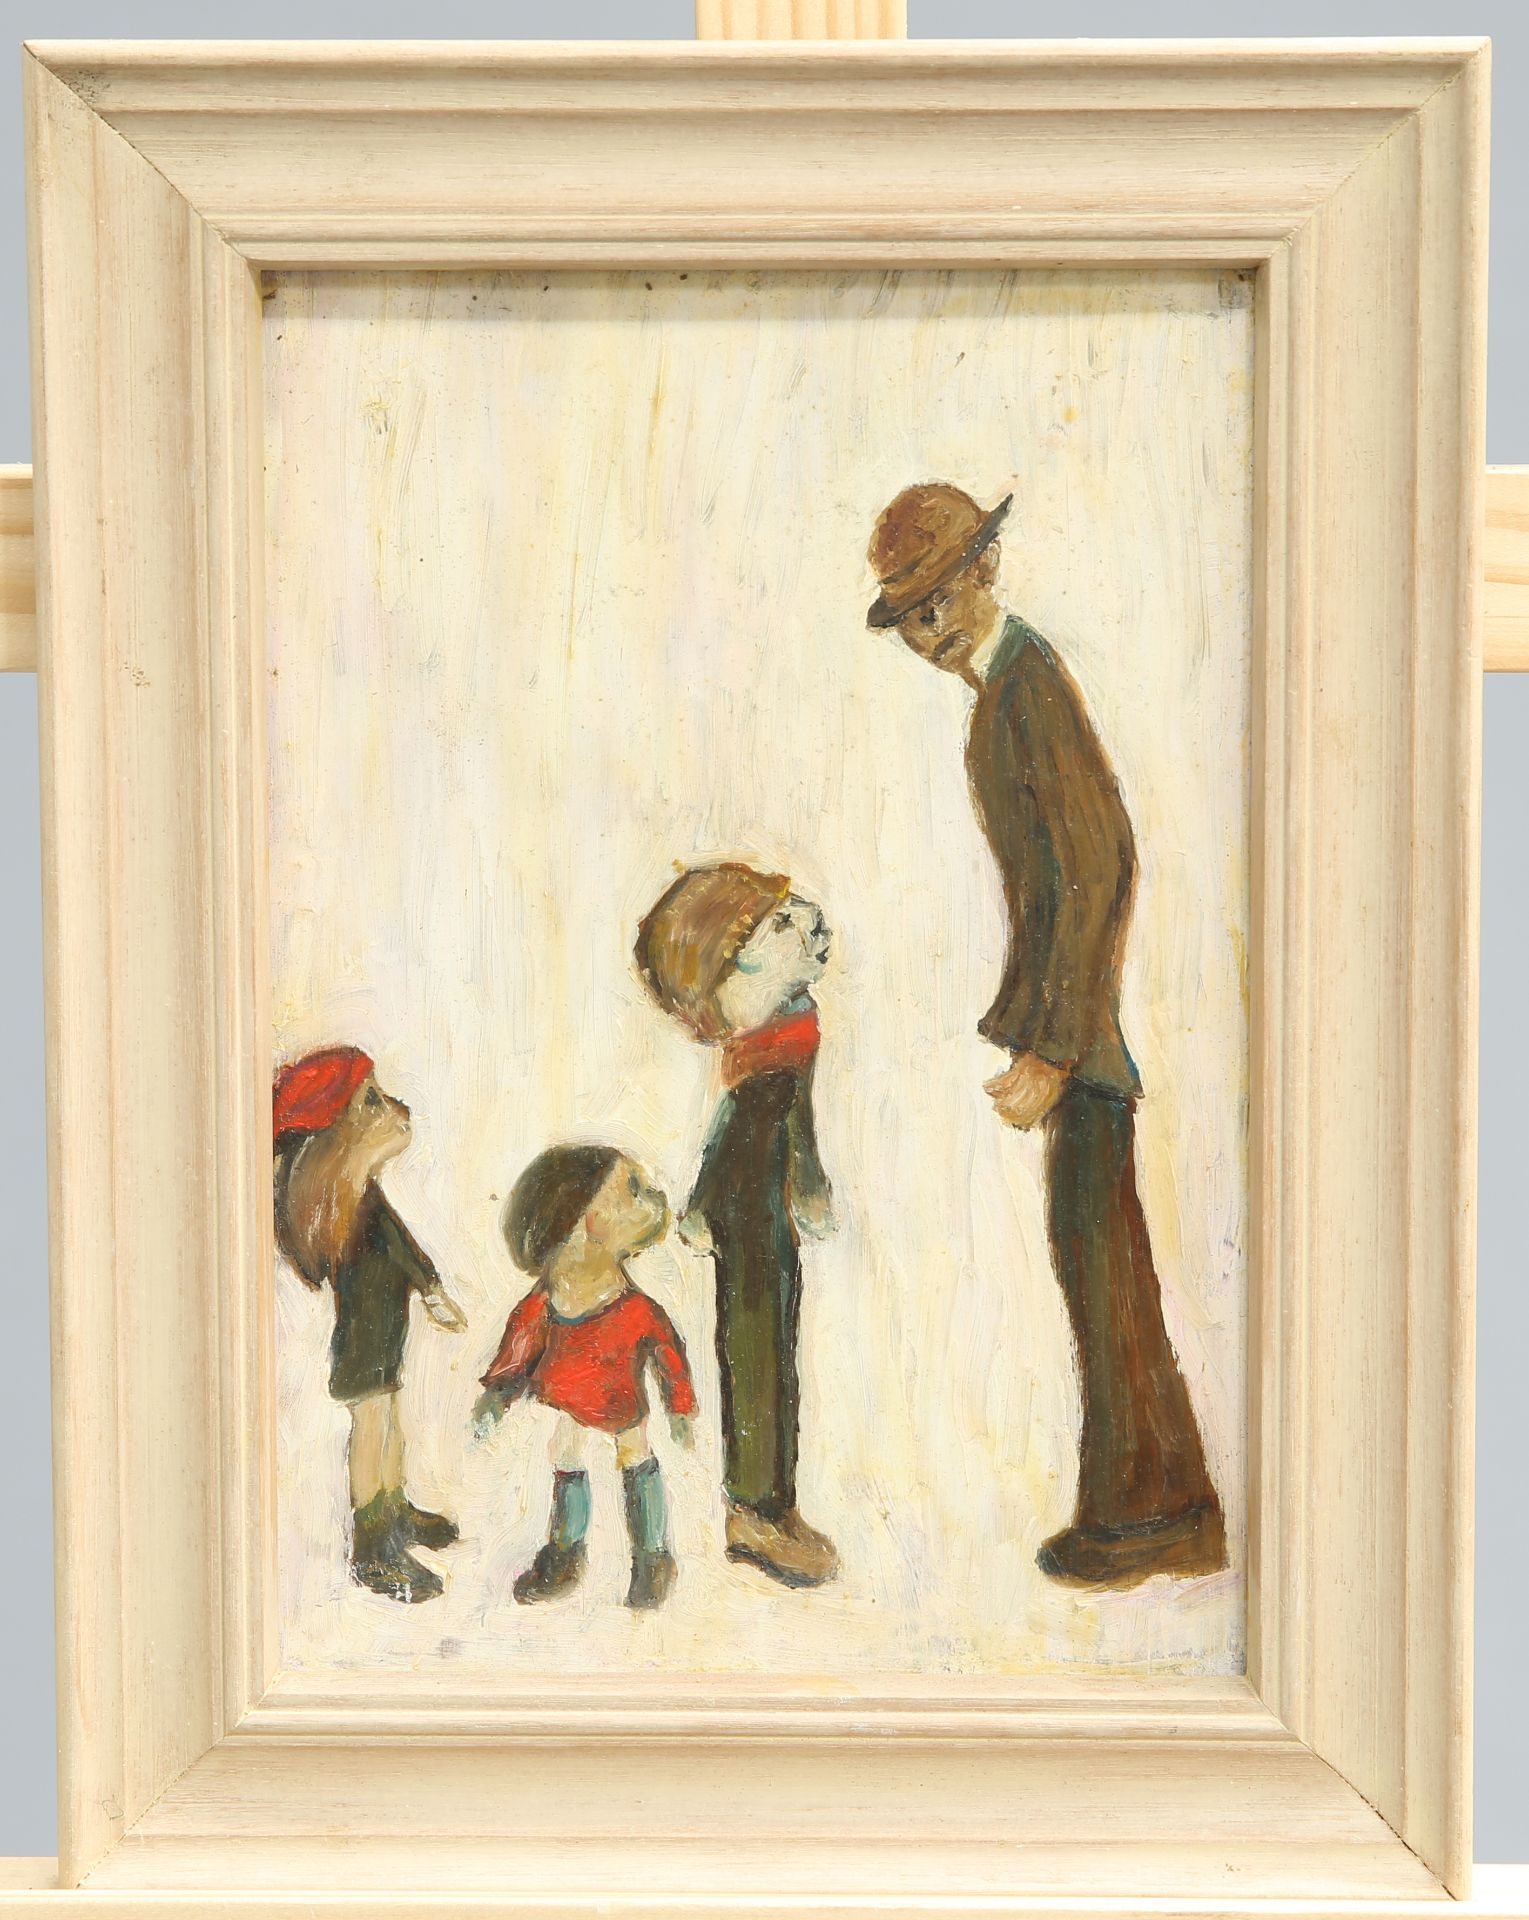 MANNER OF LAURENCE STEPHEN LOWRY (1887-1976), MAN AND CHILDREN, oil on board, sketch of a hound